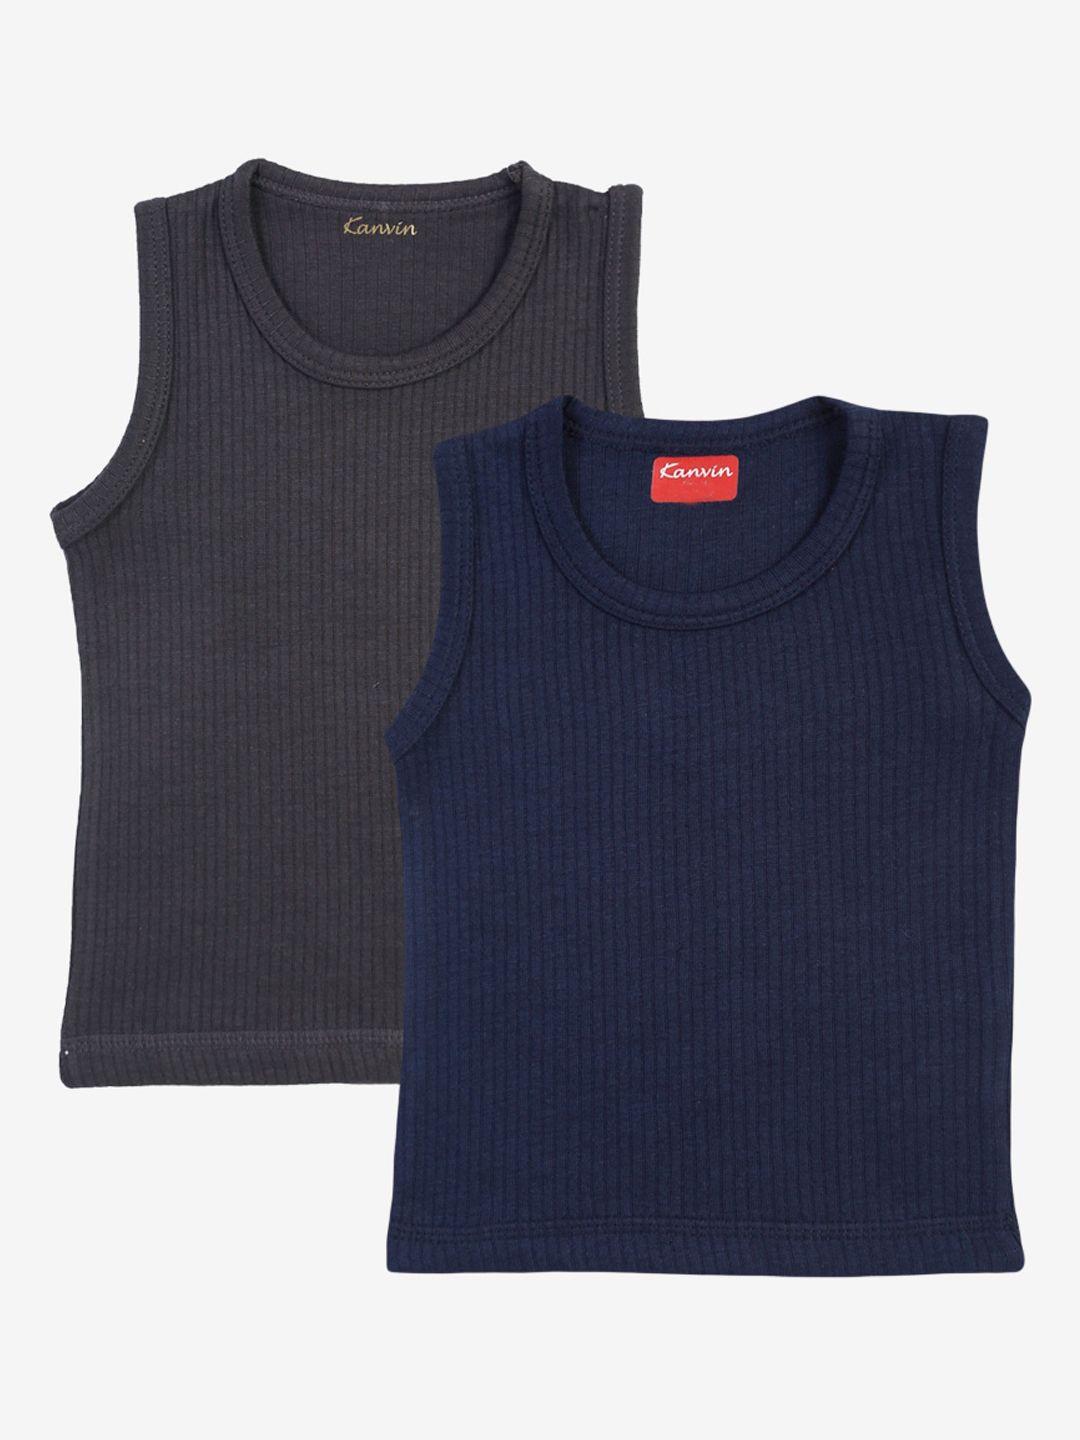 kanvin boys charcoal grey and navy blue pack of 2 striped thermal tops